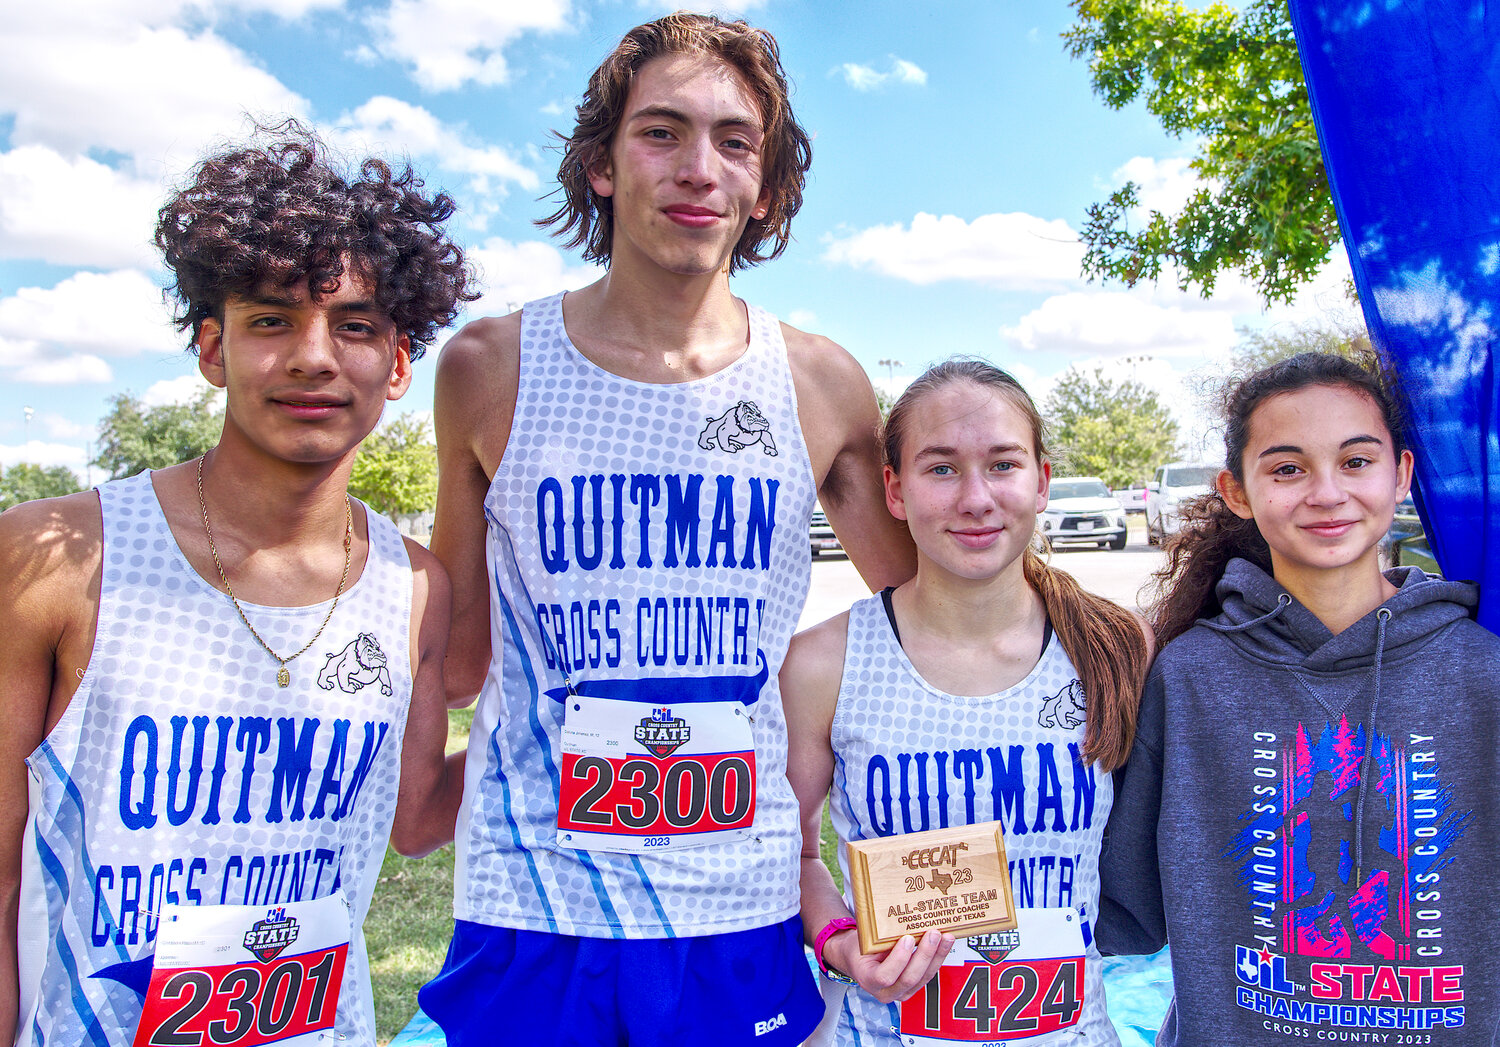 Quitman competitors, from left, Christian Plata, Dakota Jimenez, Braleigh Wood and Katie DeGorostiza. Wood was awarded all-state team honors.